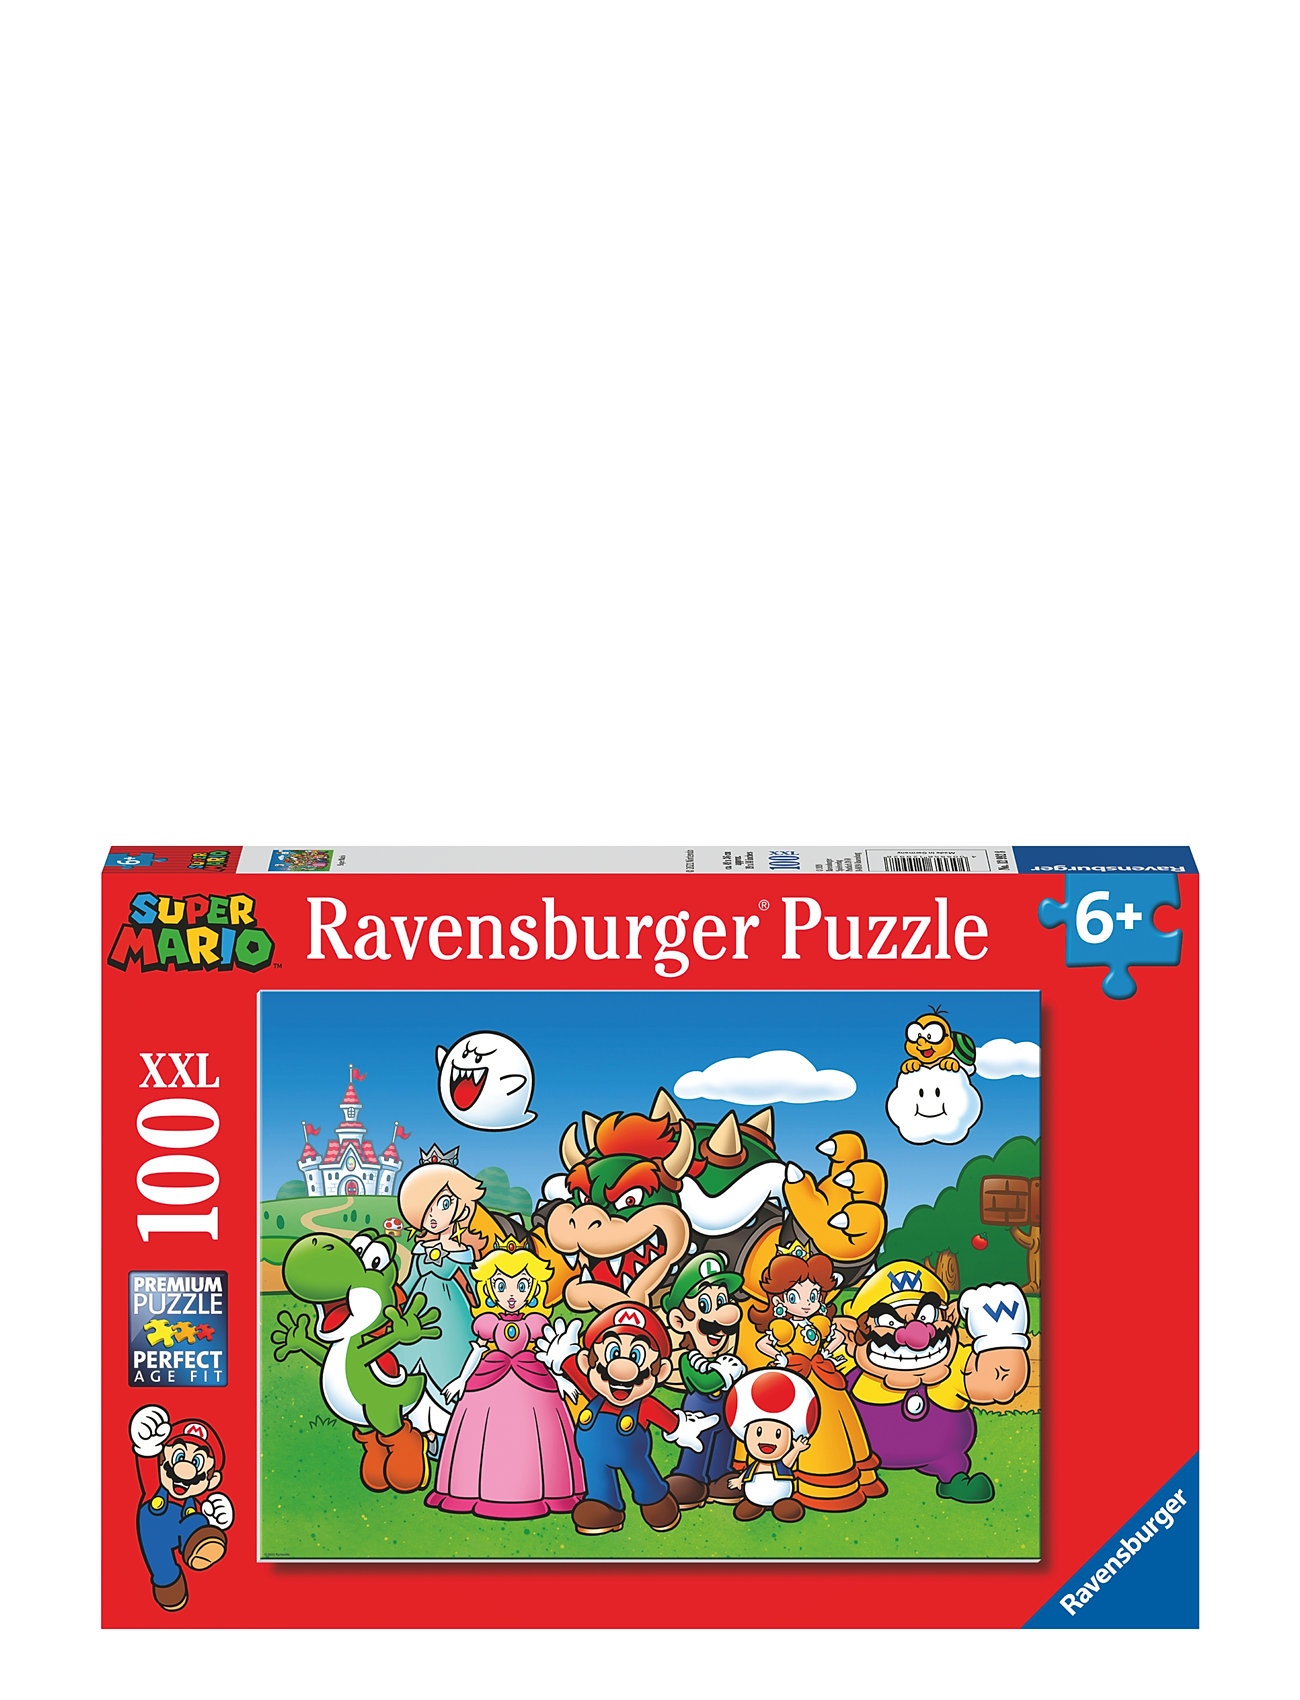 Super Mario Fun 100P Toys Puzzles And Games Puzzles Classic Puzzles Multi/patterned Ravensburger